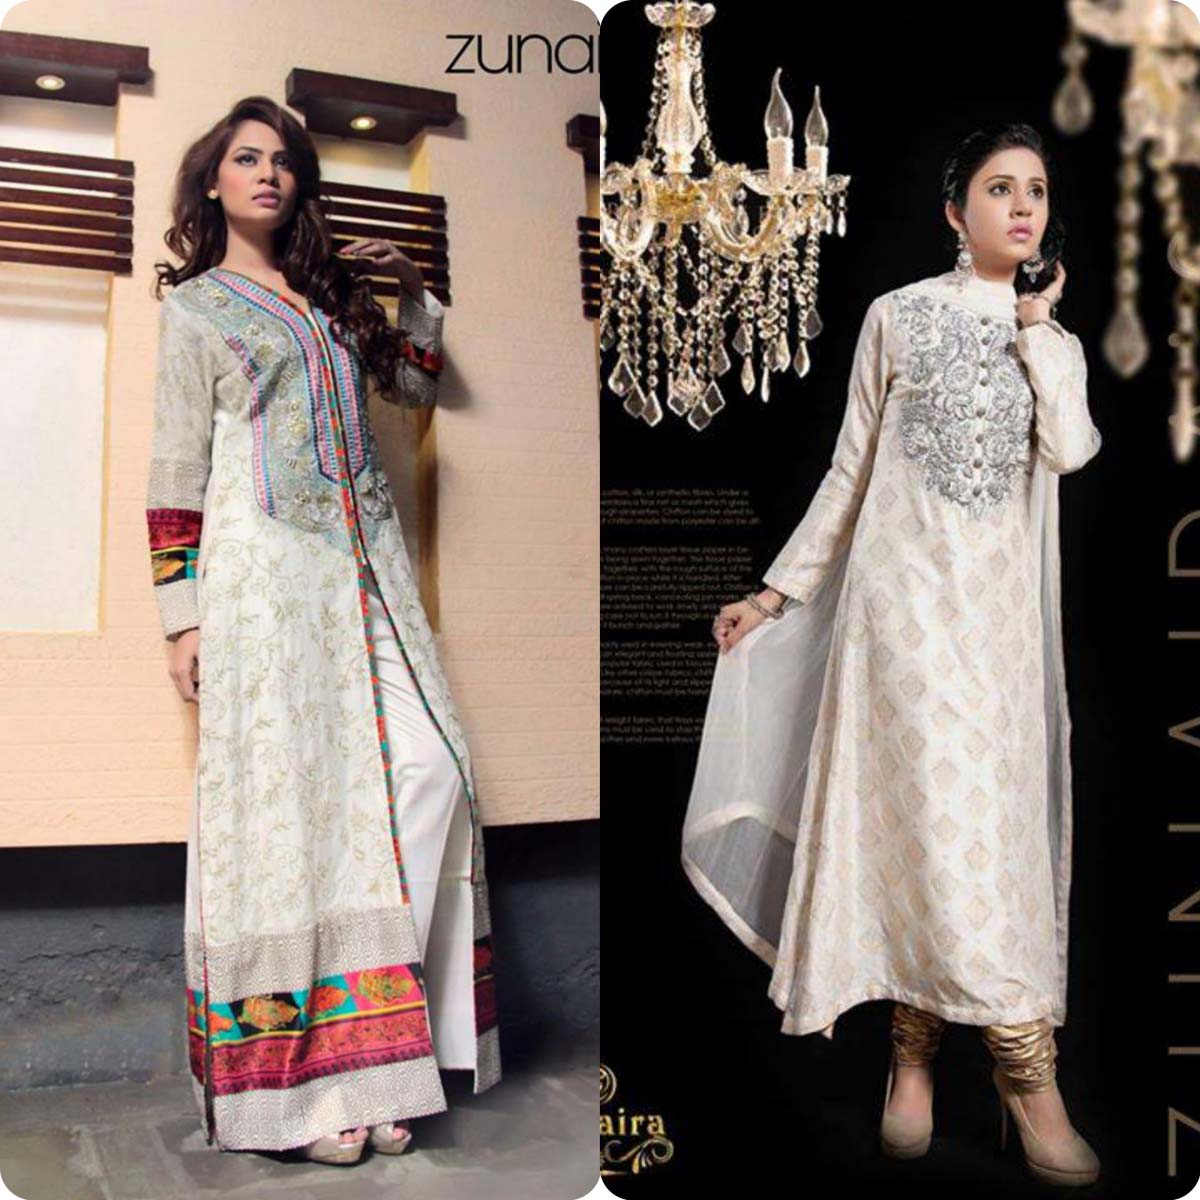 Zunaira Lounge Party Wear Frocks Dresses Design Collection 2016-2017 ...